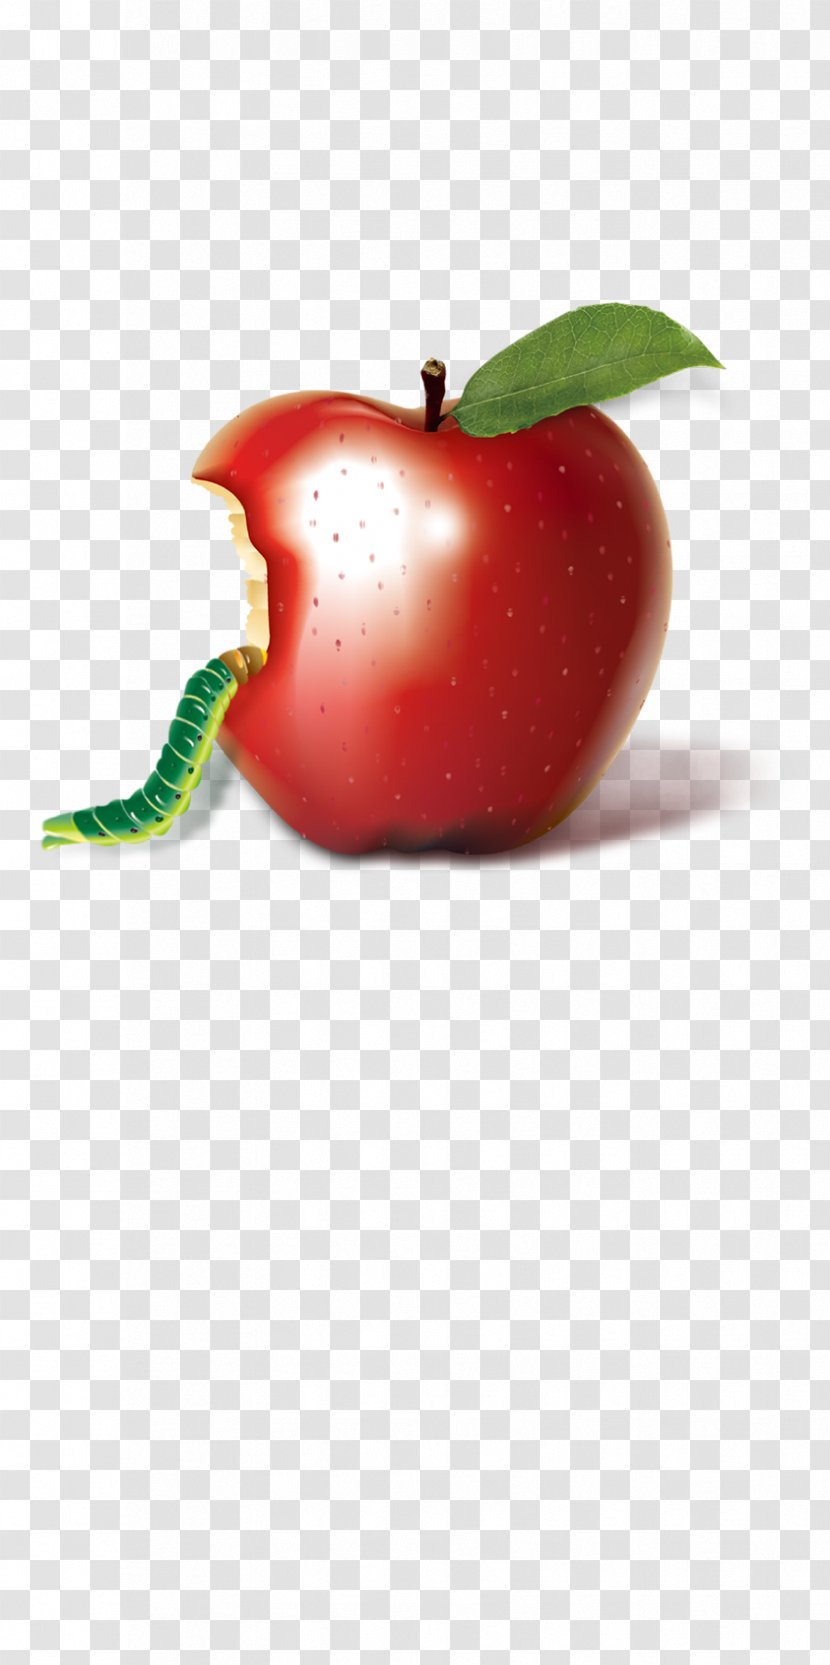 Apple Download - Strawberry - Insects Transparent PNG